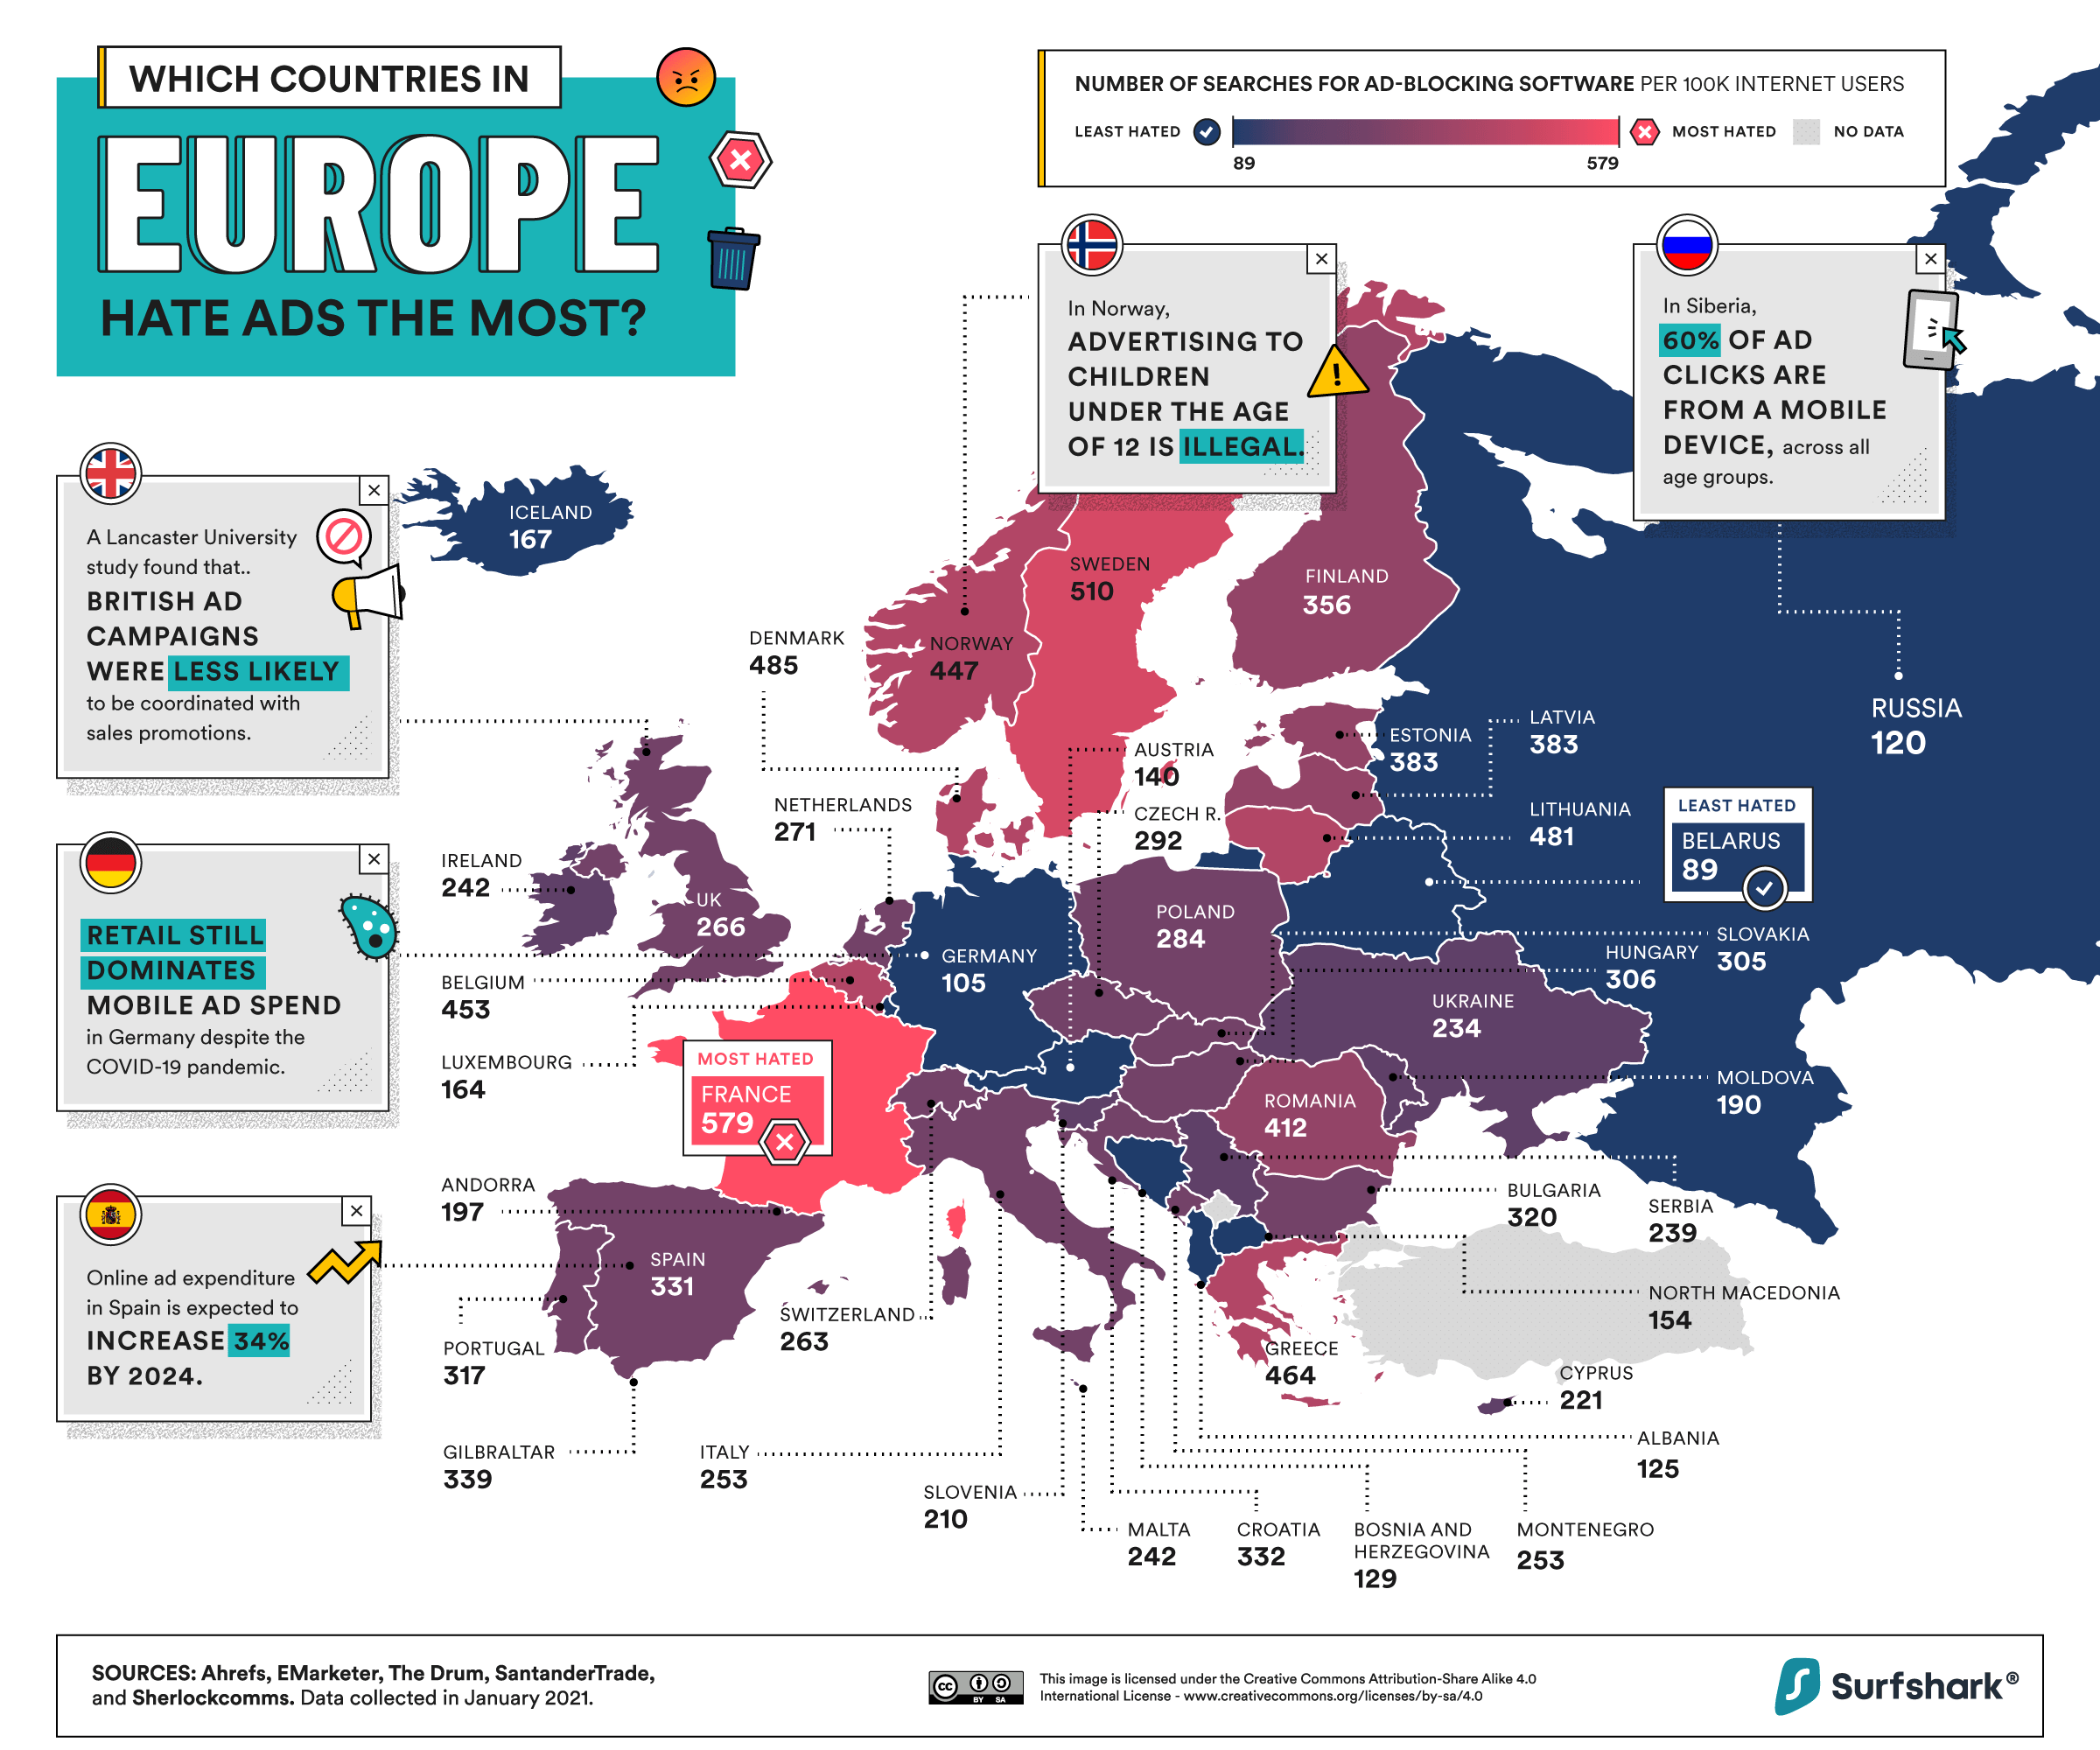 a map showing which countries in Europe made the most Google searches for ad blocking software